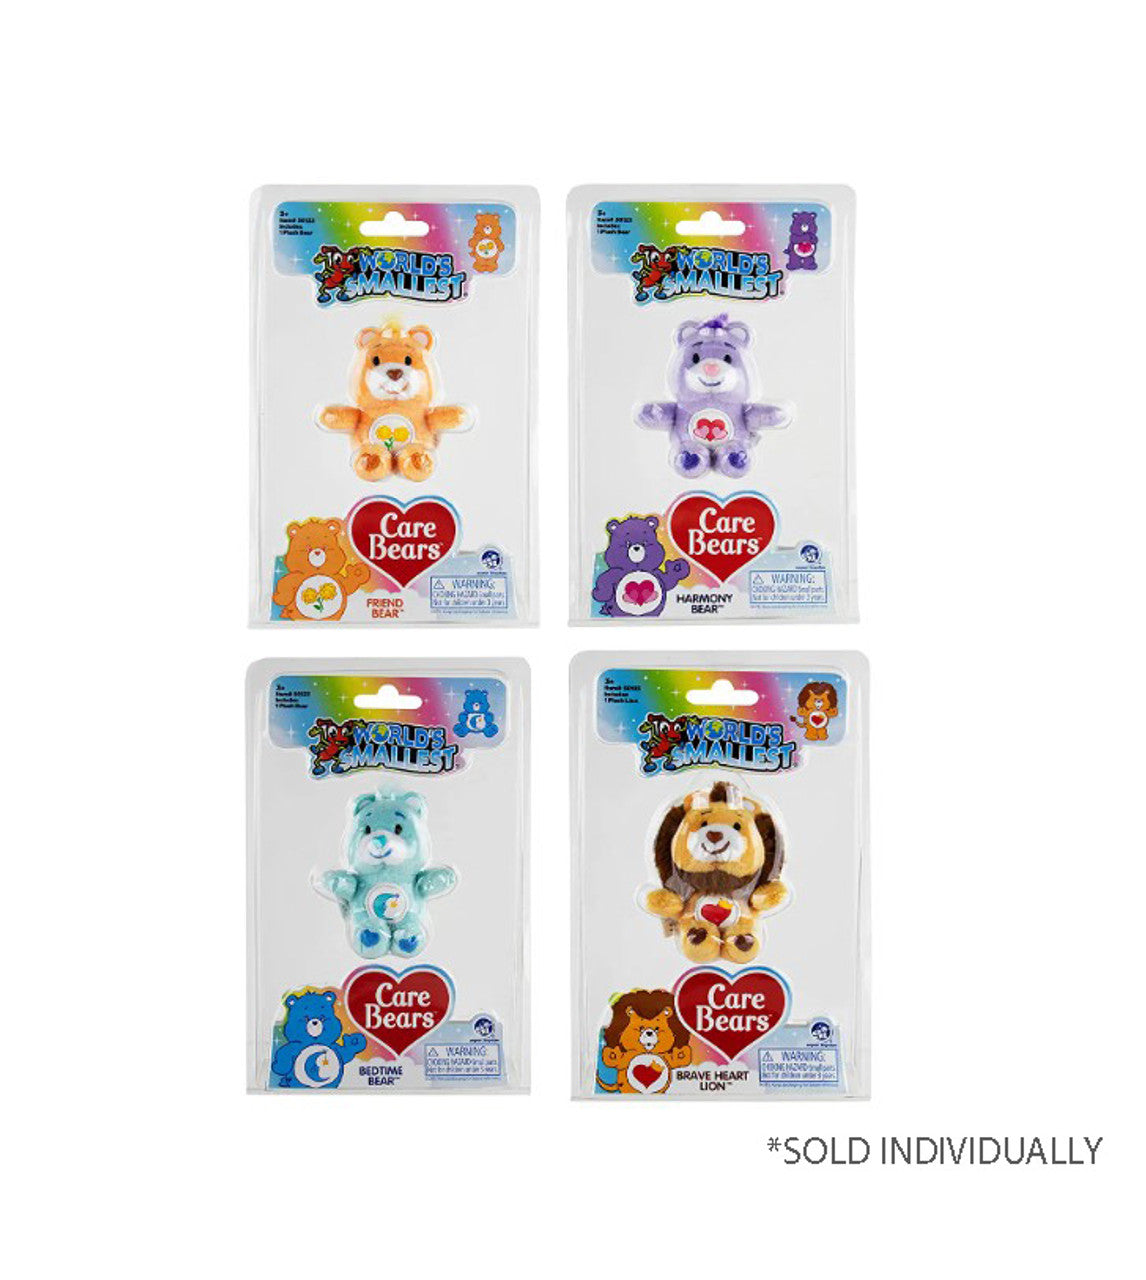 World's Smallest Care Bears - Series 3 